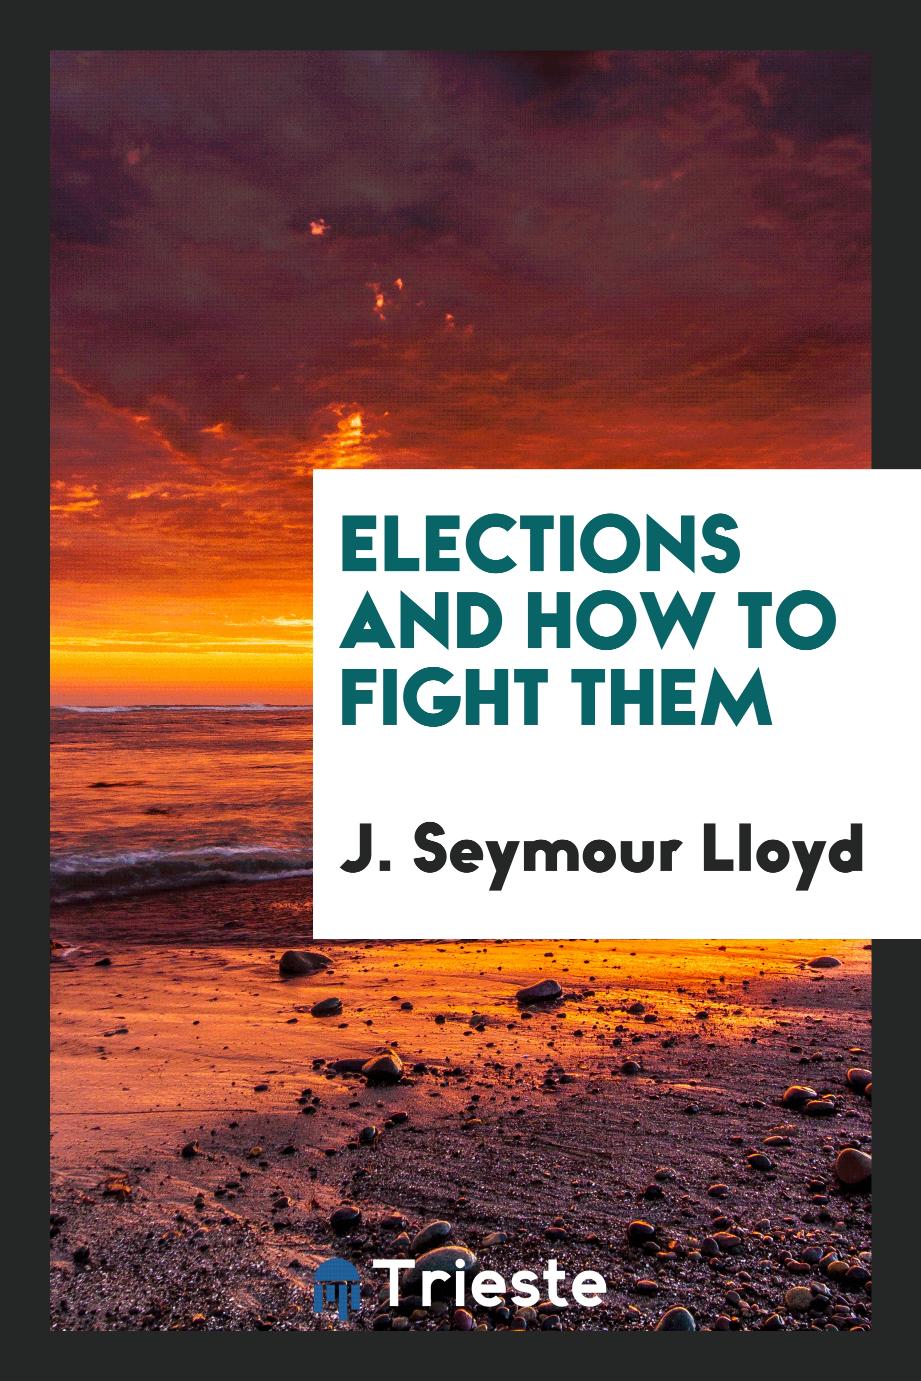 J. Seymour Lloyd - Elections and How to Fight Them